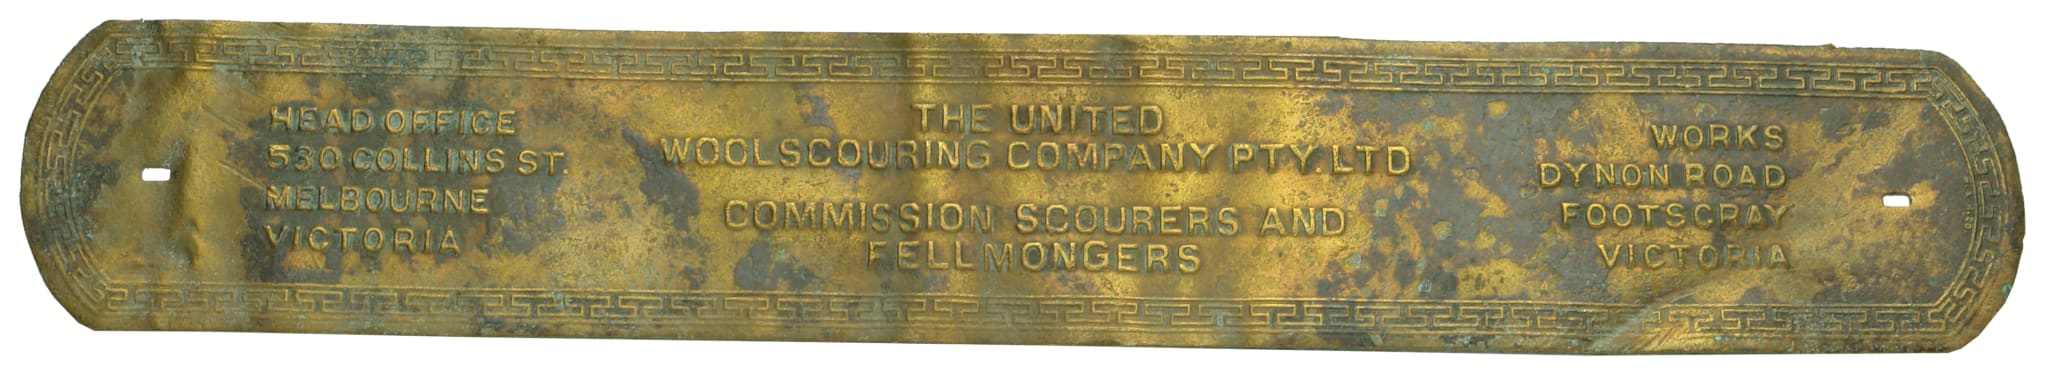 United Woolscouring Brass Plaque